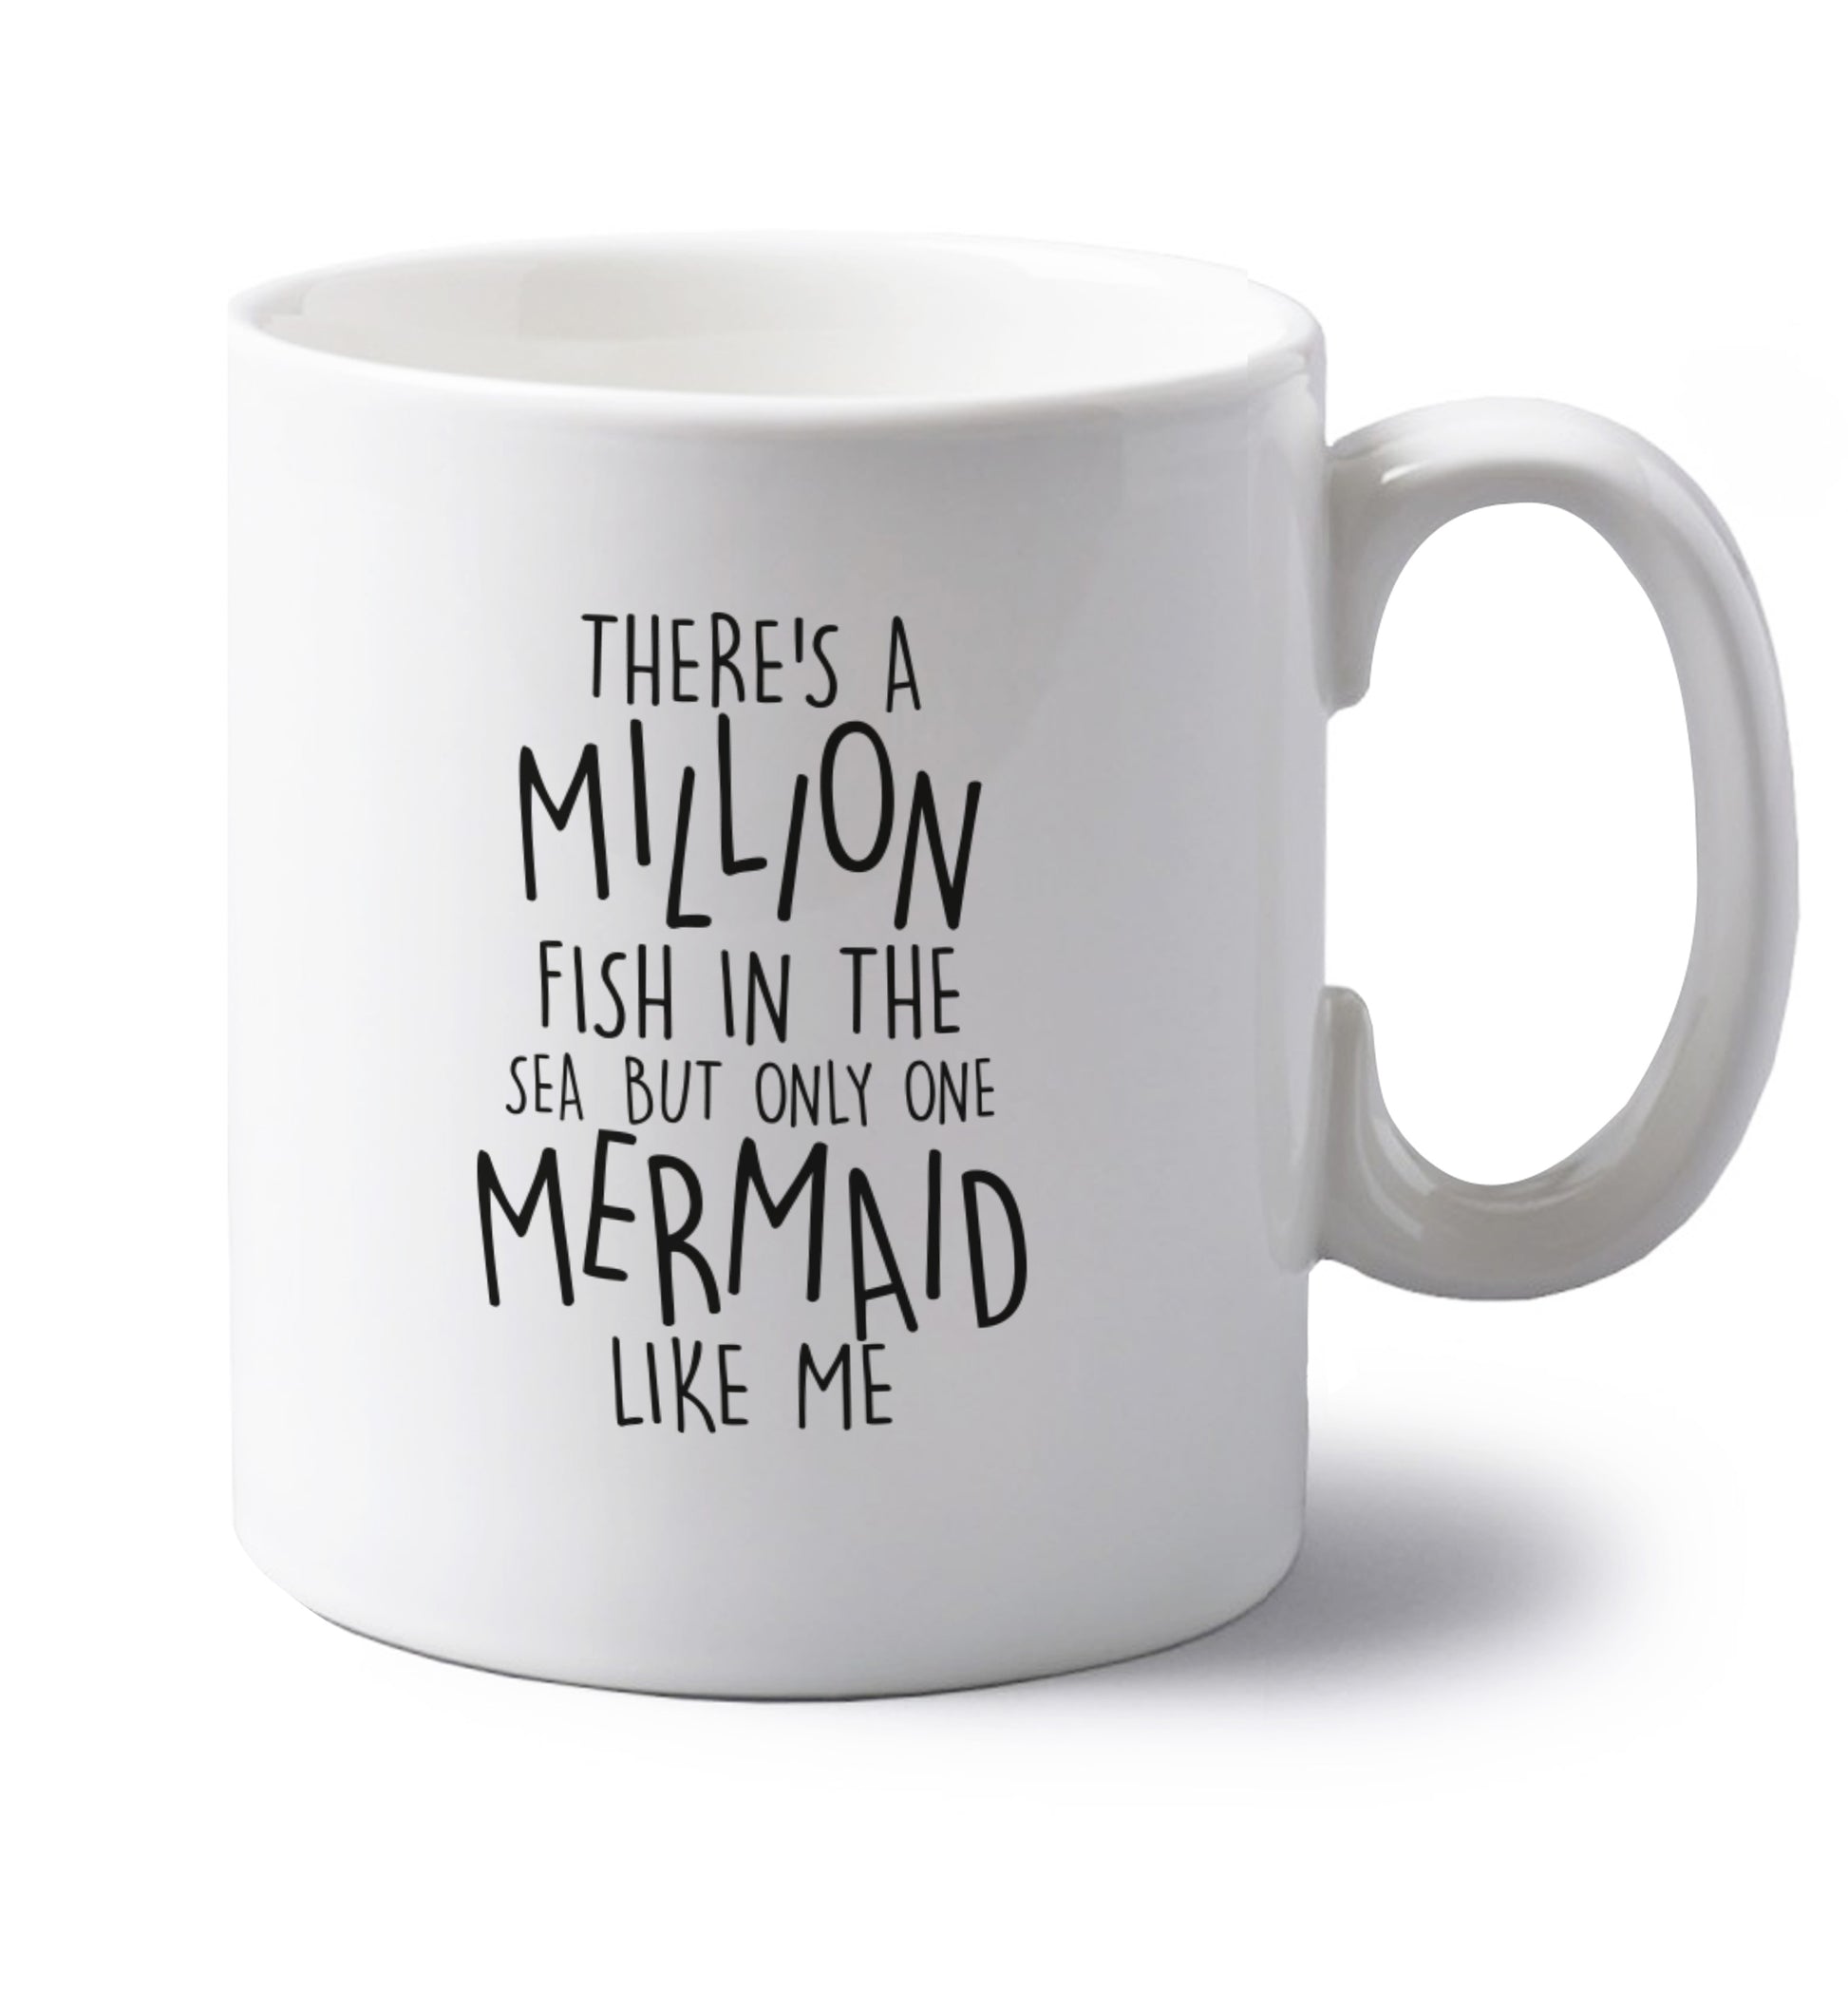 There's a million fish in the sea but only one mermaid like me left handed white ceramic mug 